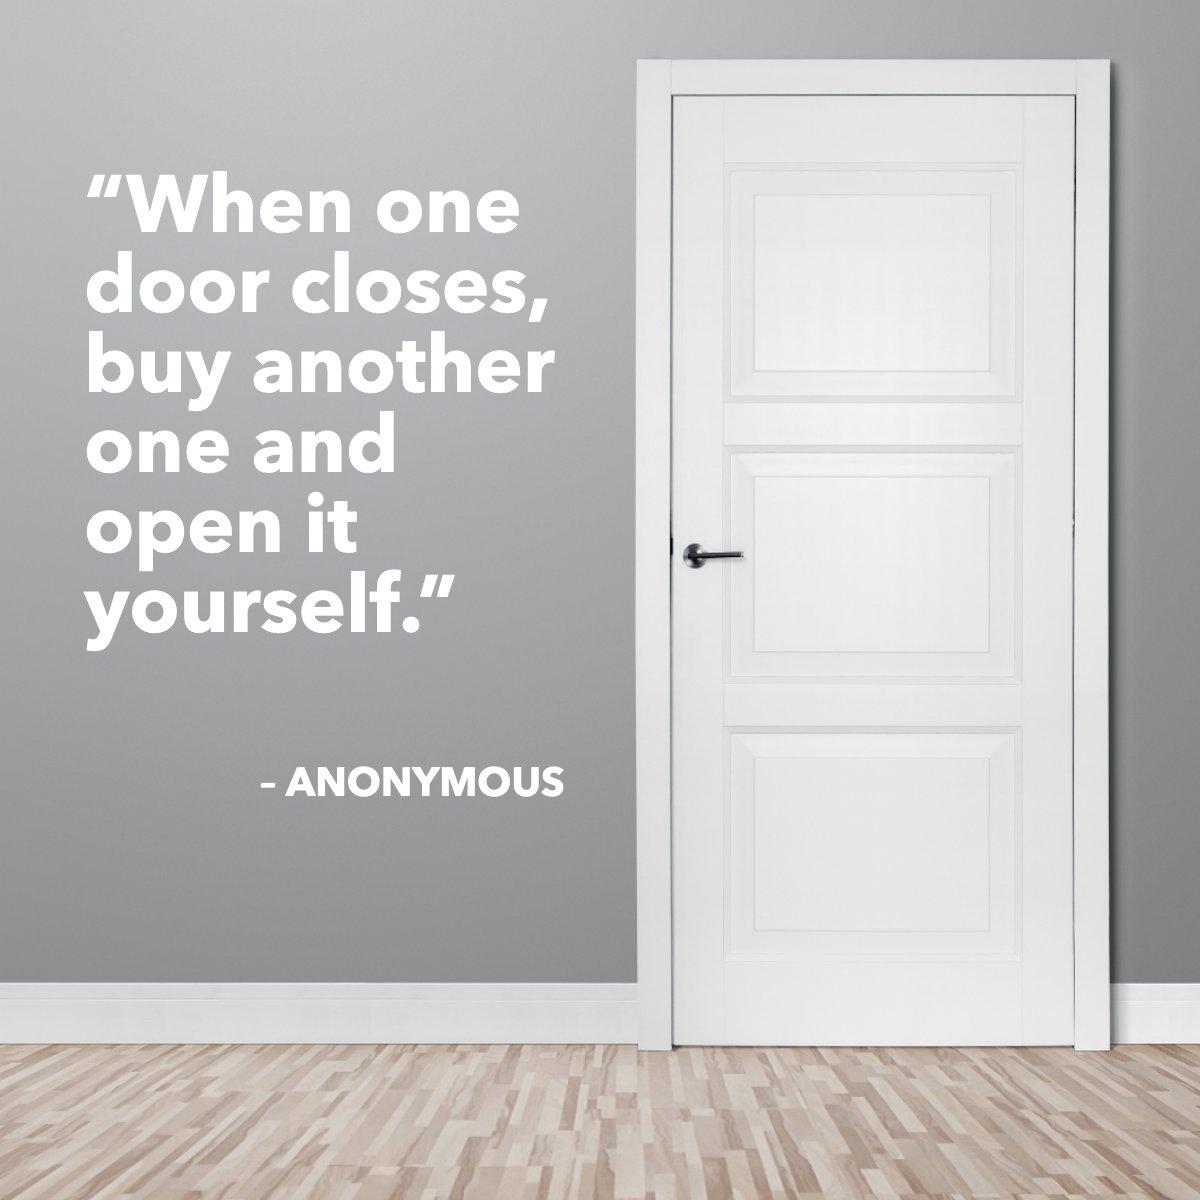 'When one door closes, buy another one and open it yourself.' 
– Anonymous

What doors are you opening up for yourself? Let us know in the comments!

#quote #door #whitedoor #interior #opportunities #opportunity #inspirational
 #riscosells #theriscogroup #kwmainline